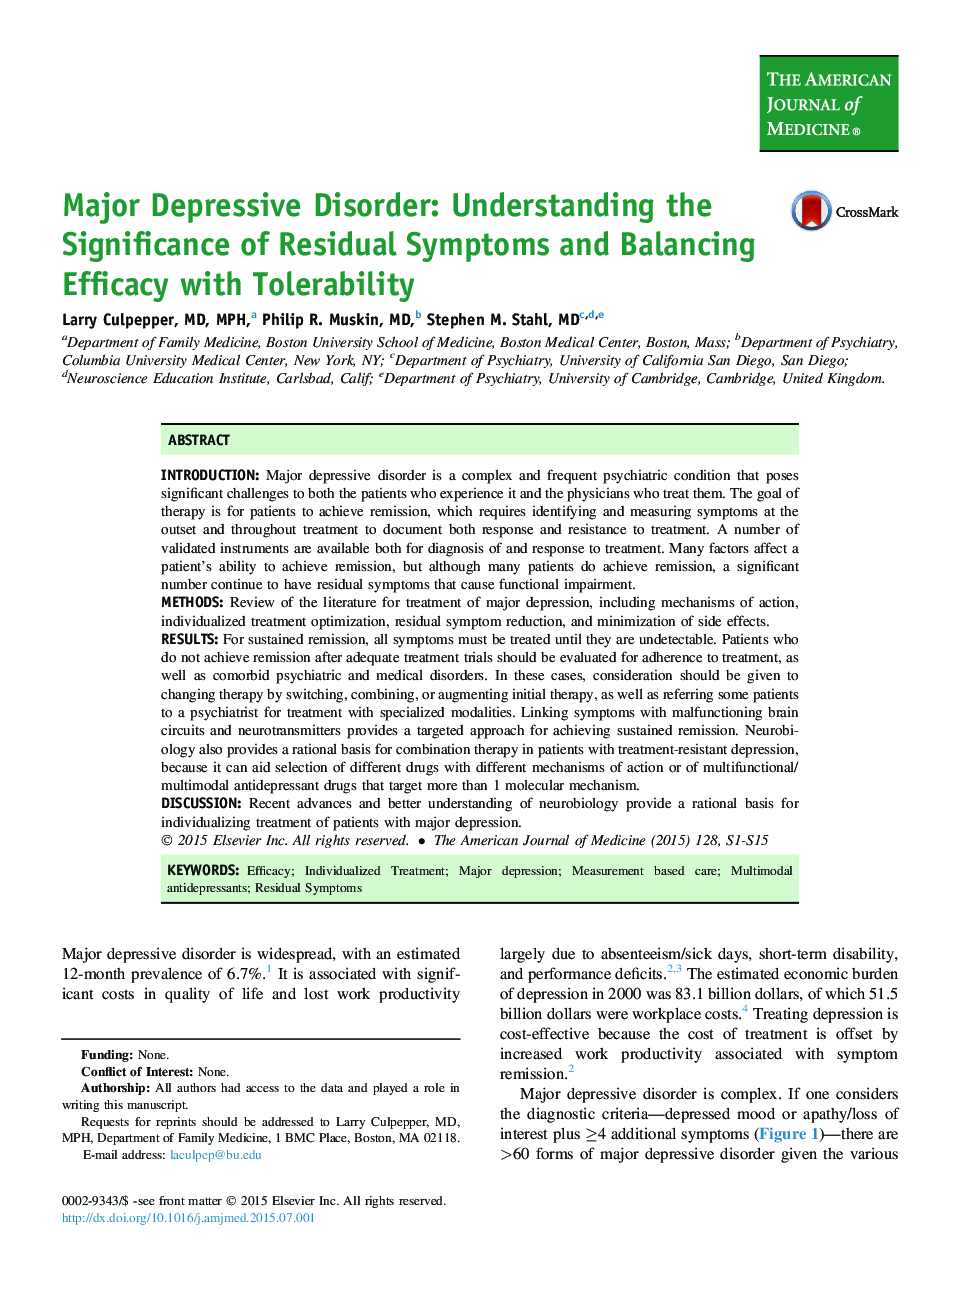 Major Depressive Disorder: Understanding the Significance of Residual Symptoms and Balancing Efficacy with Tolerability 